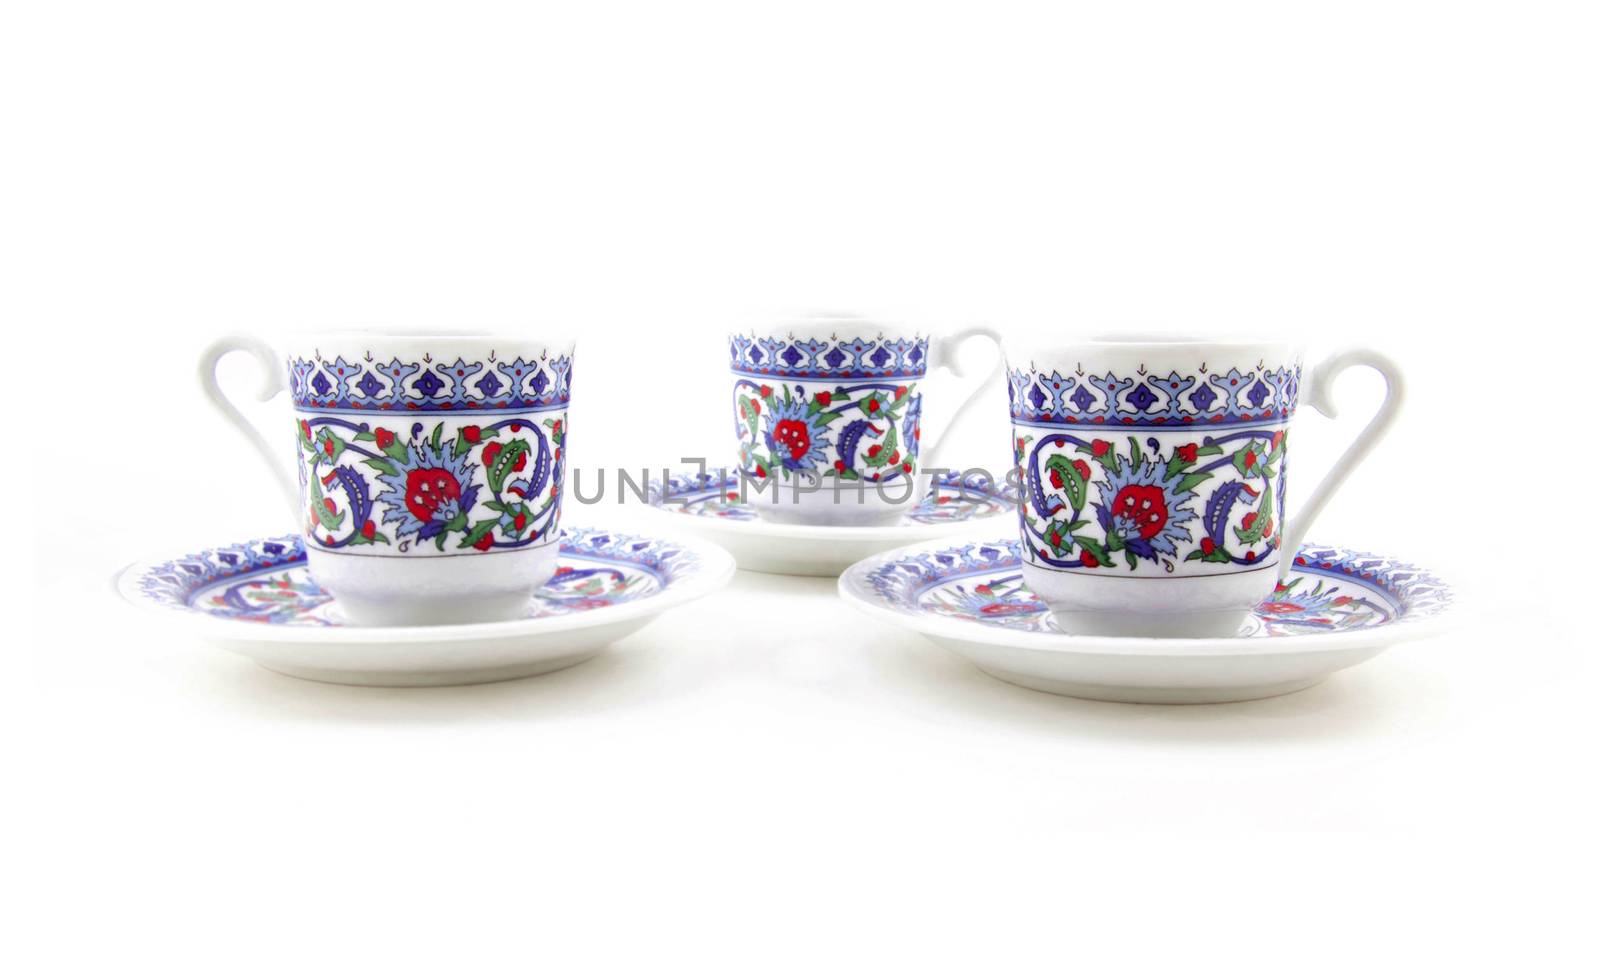 Ornamented teacups isolated on white